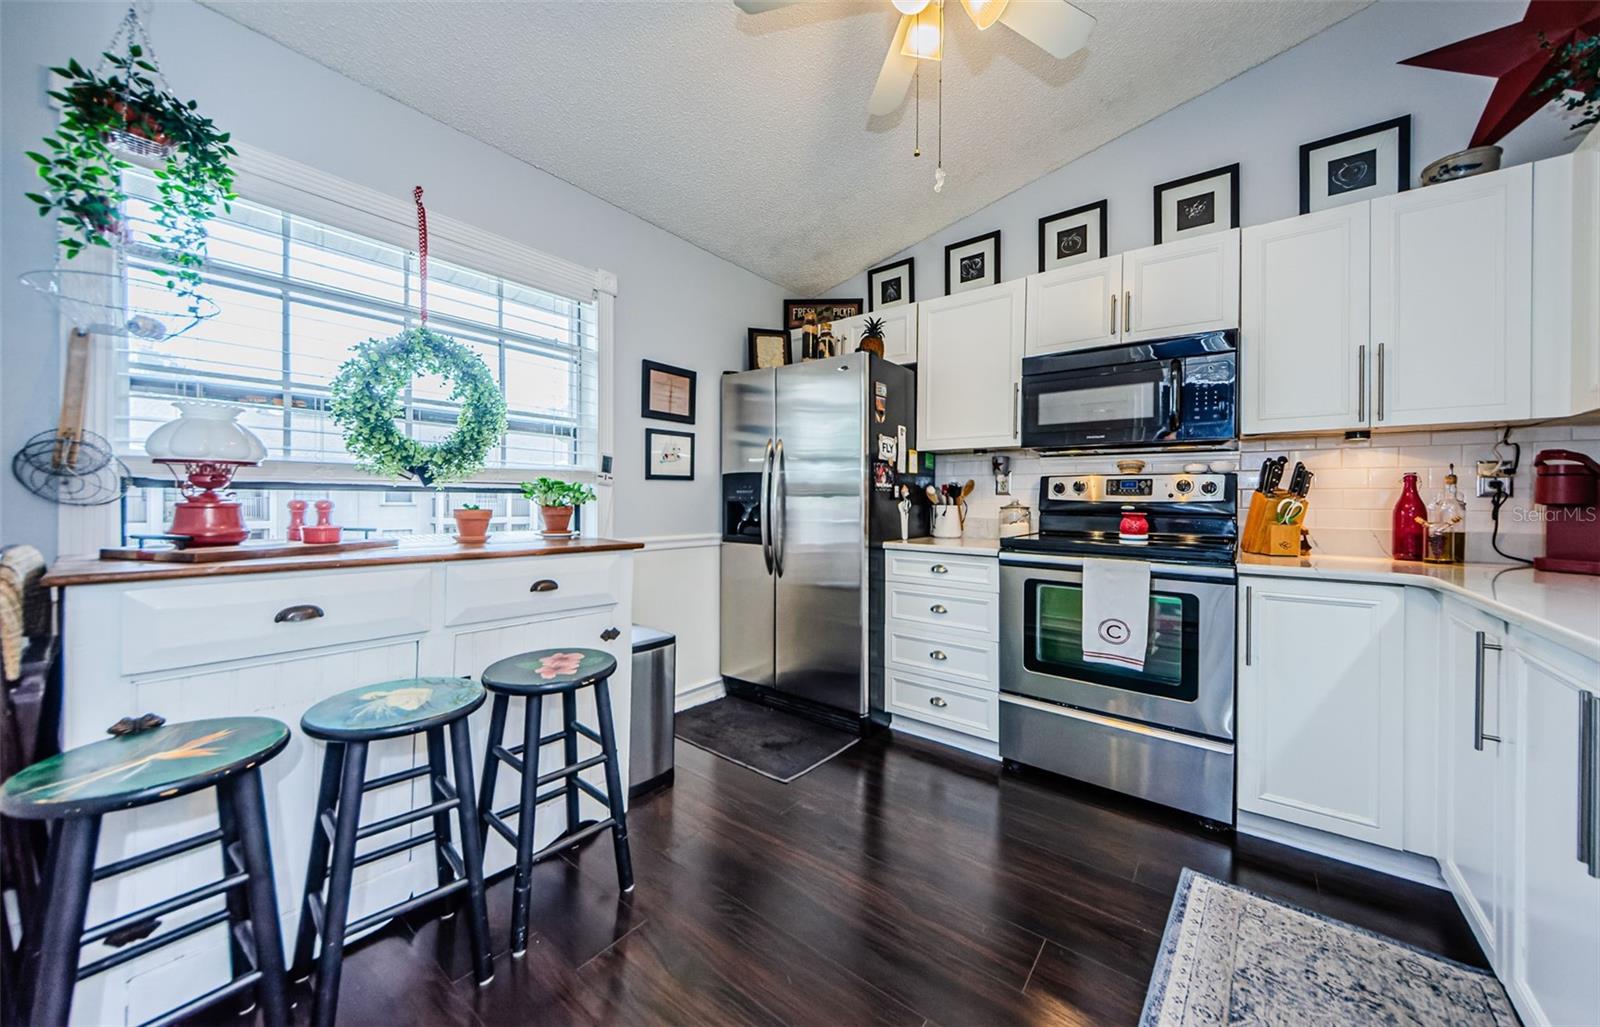 Light and Bright kitchen with gleaming luxury vinyl flooring, stainless steel appliances, and quartz counter tops